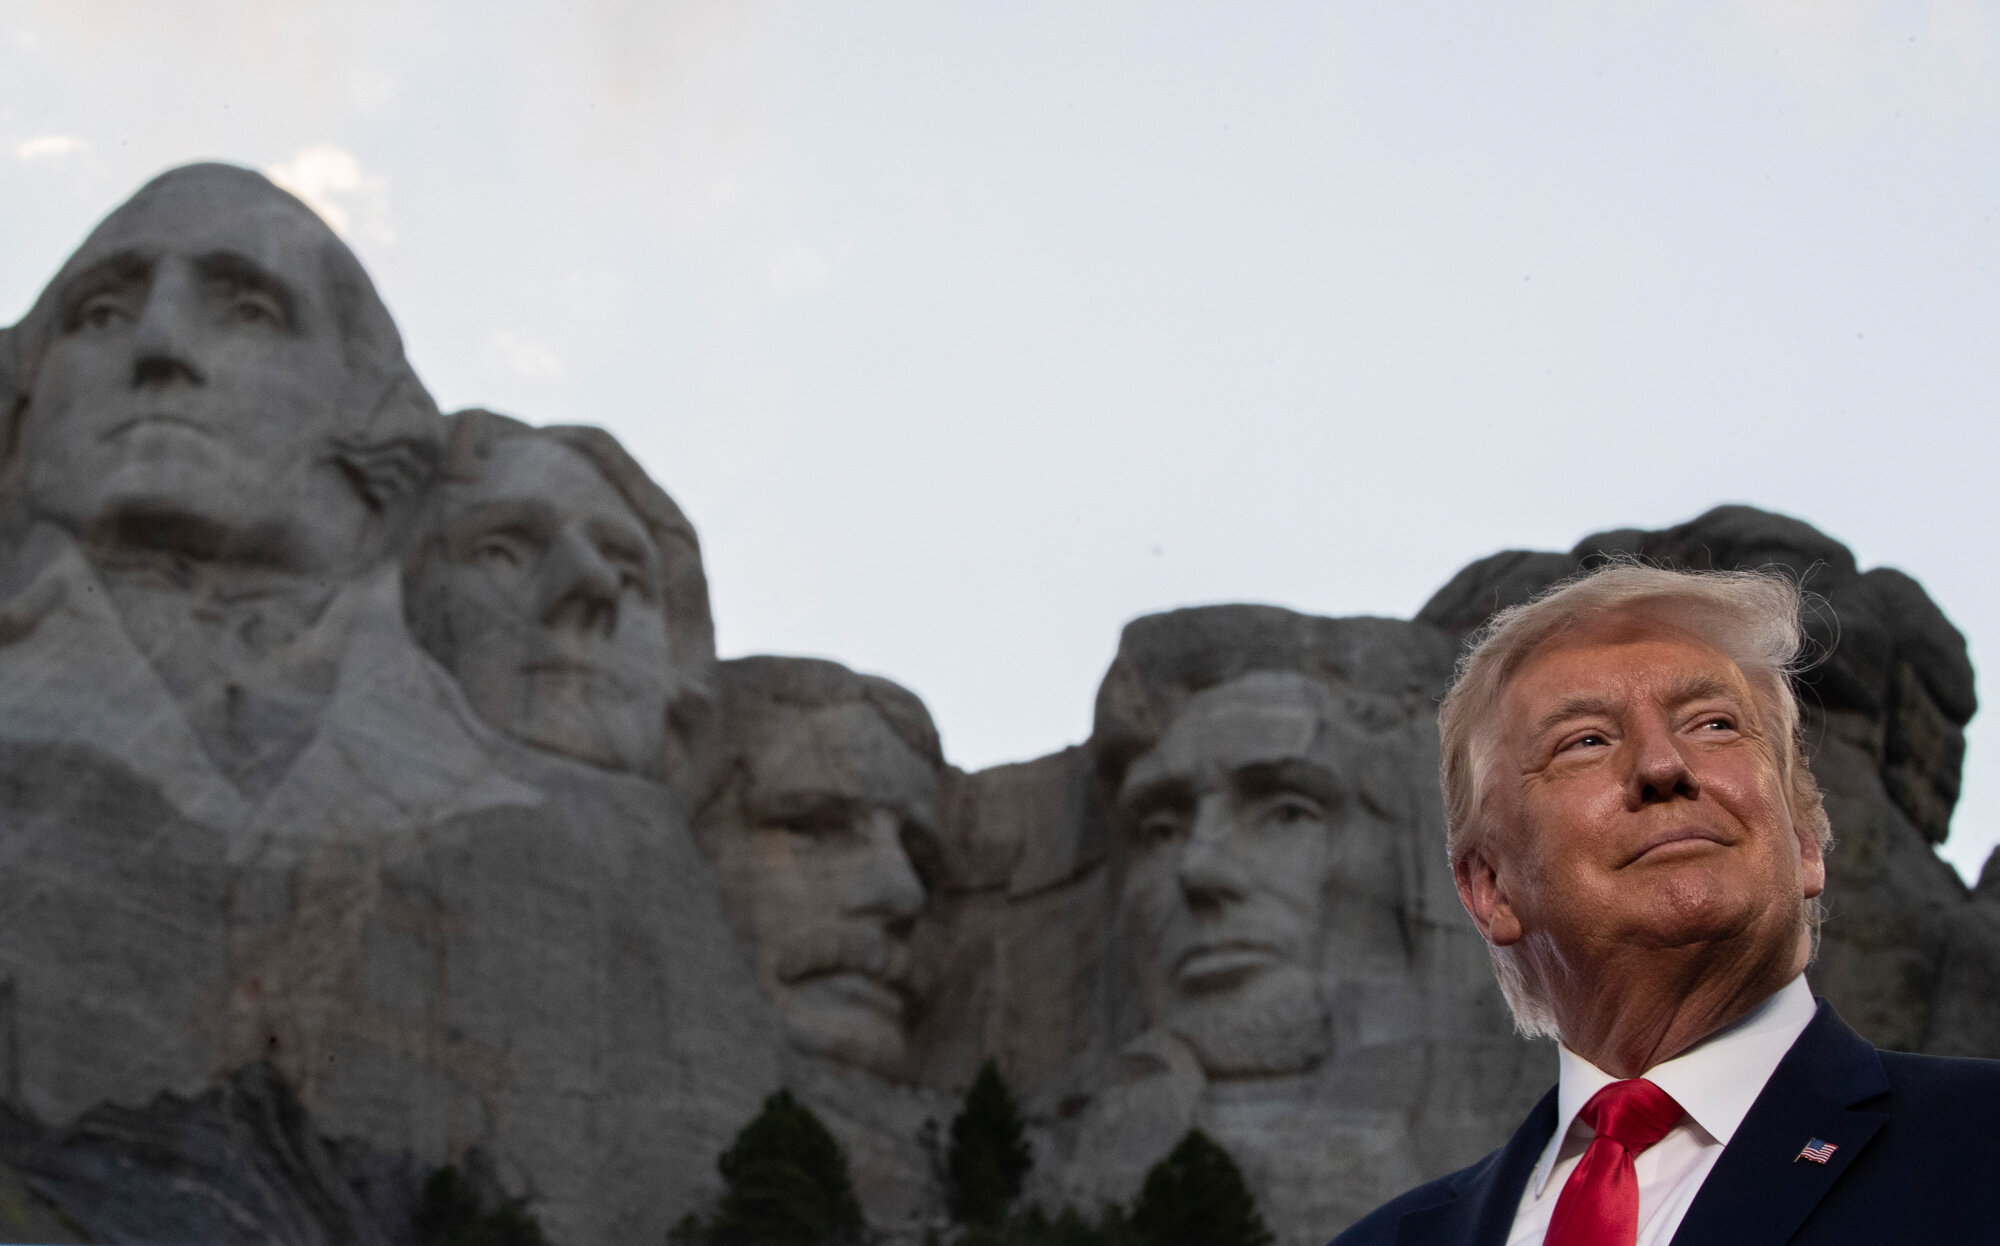  President Donald Trump smiles during a visit to Mount Rushmore National Memorial near Keystone, S.D., on July 3, 2020. (AP Photo/Alex Brandon) 